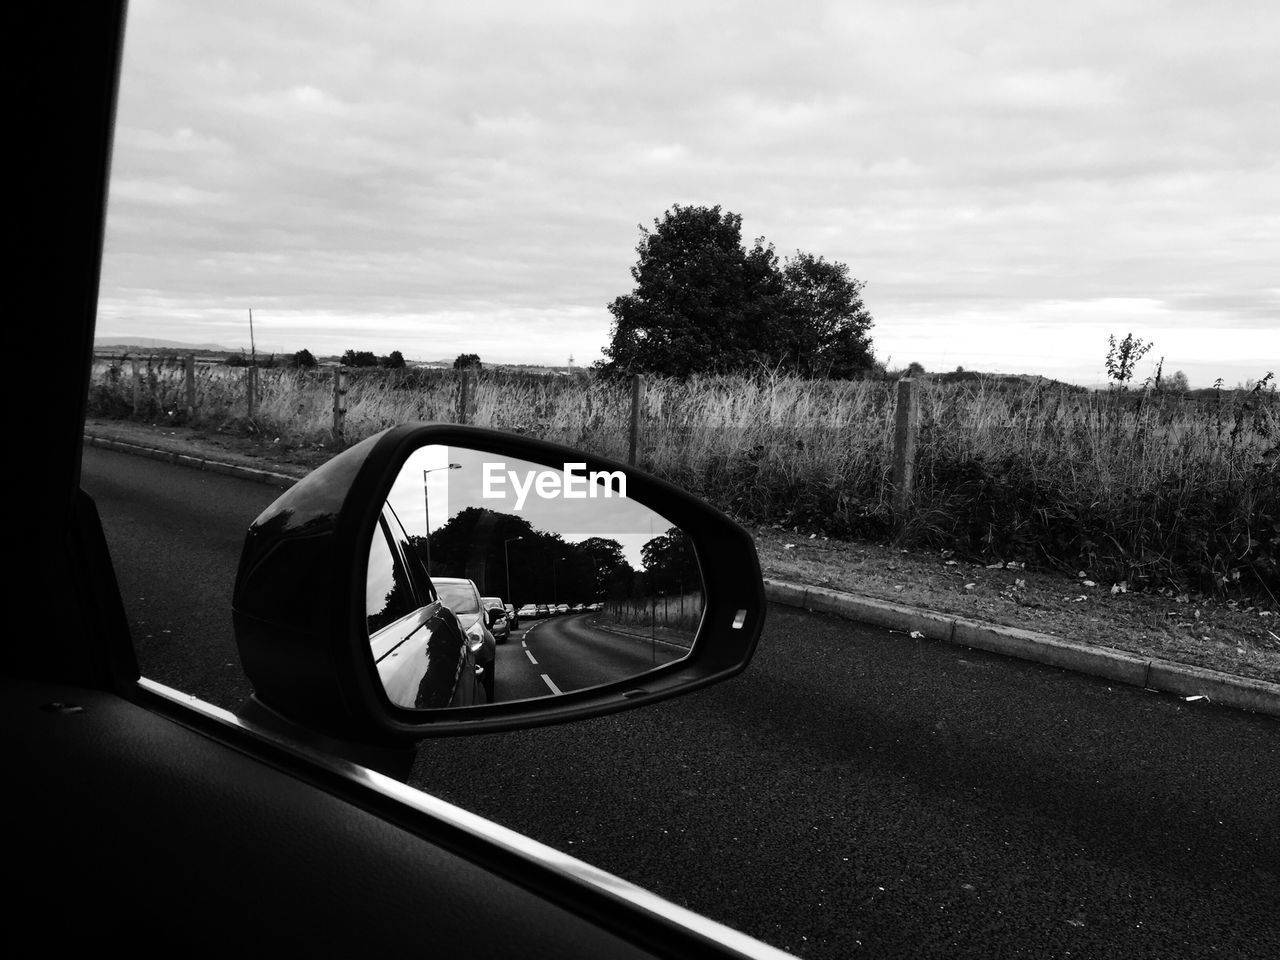 Reflection in side-view mirror